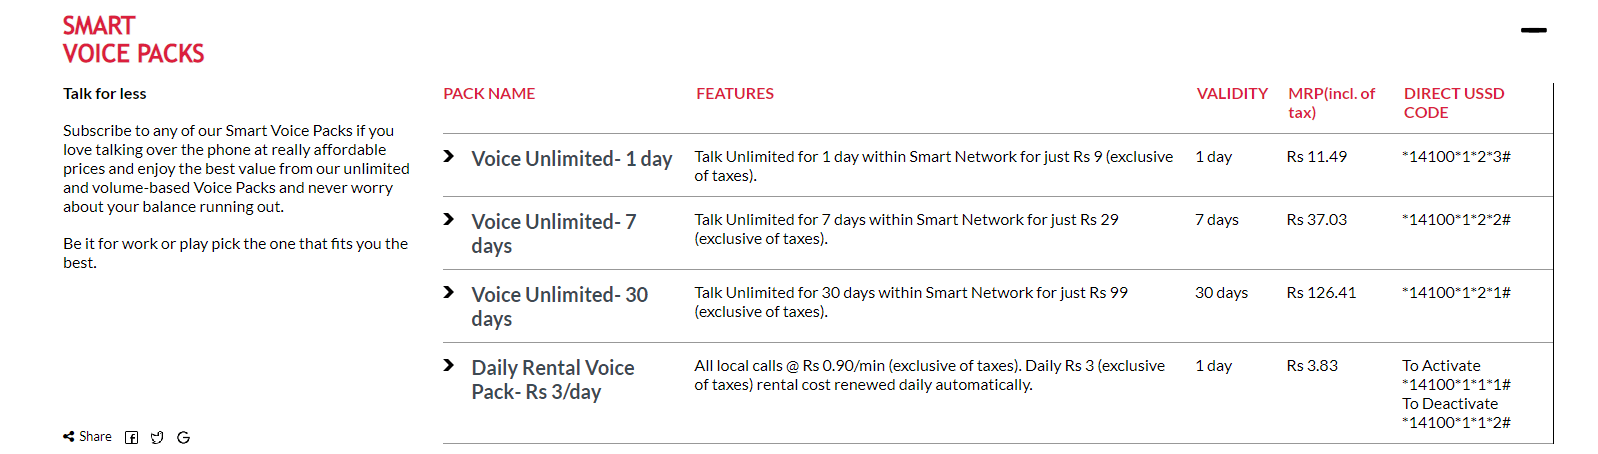 smartcell voice pack list for mobile sim in nepal